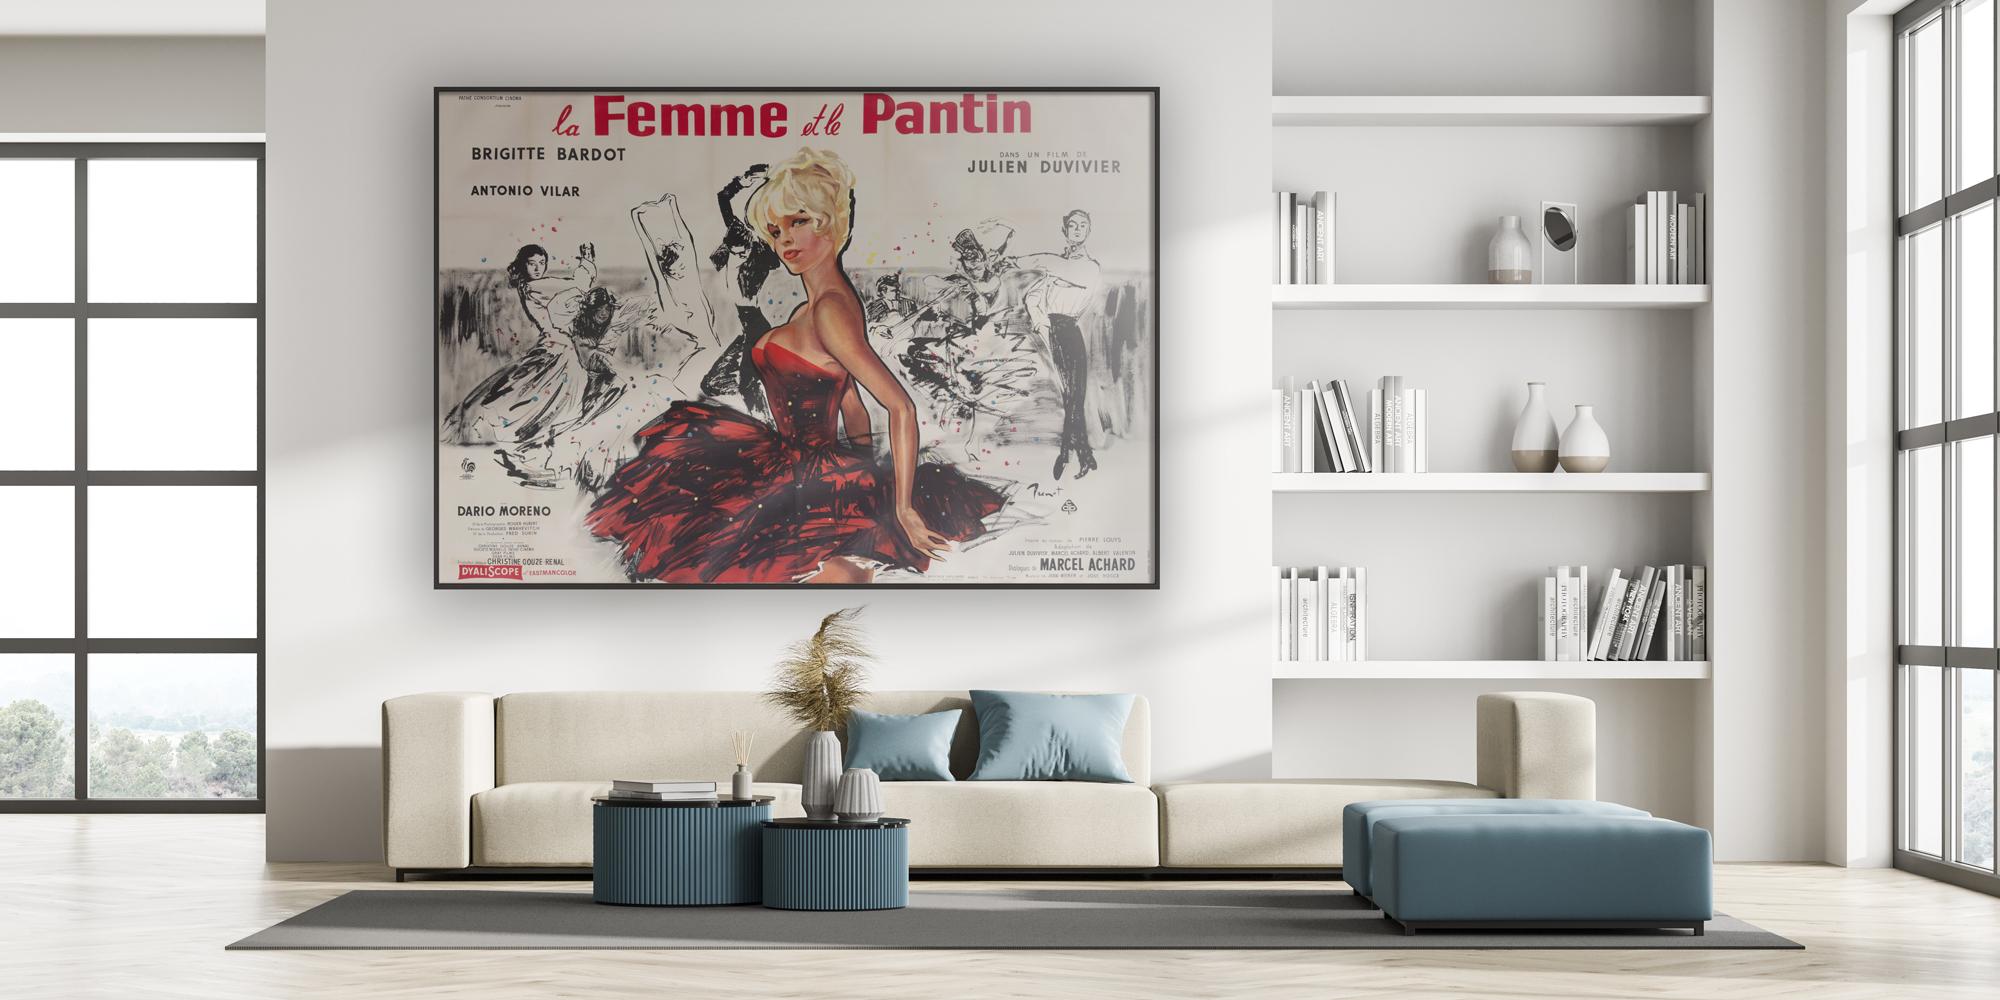 Superb first-year-of-release country-of-origin French Double Grande film poster for La Femme et le Pantin.Wonderfuldesign by Yves Thos looks amazing on the massive scale of the double grande poster.

La Femme et le Pantin, released in the United